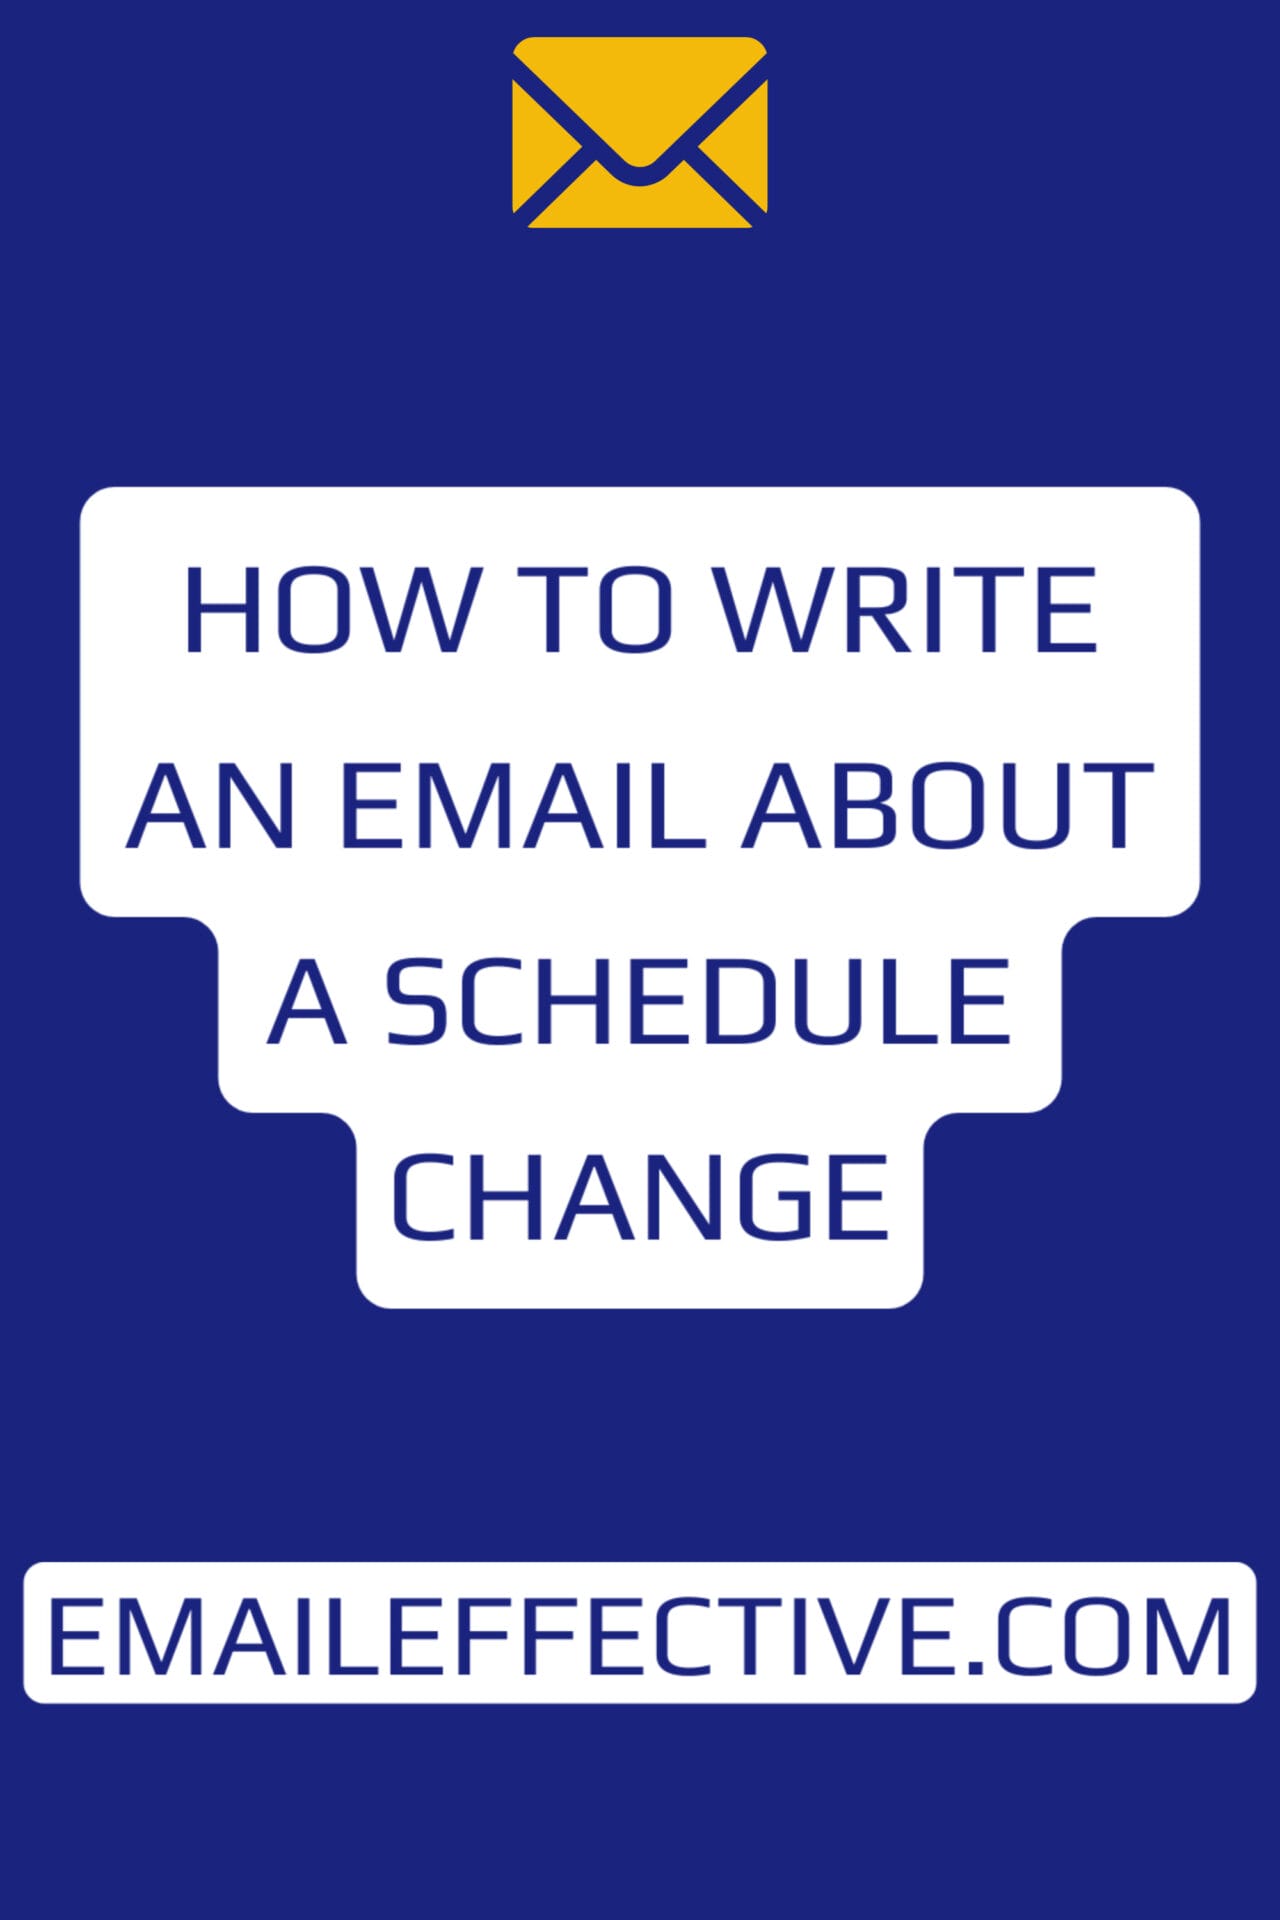 How to Write an Email About a Schedule Change